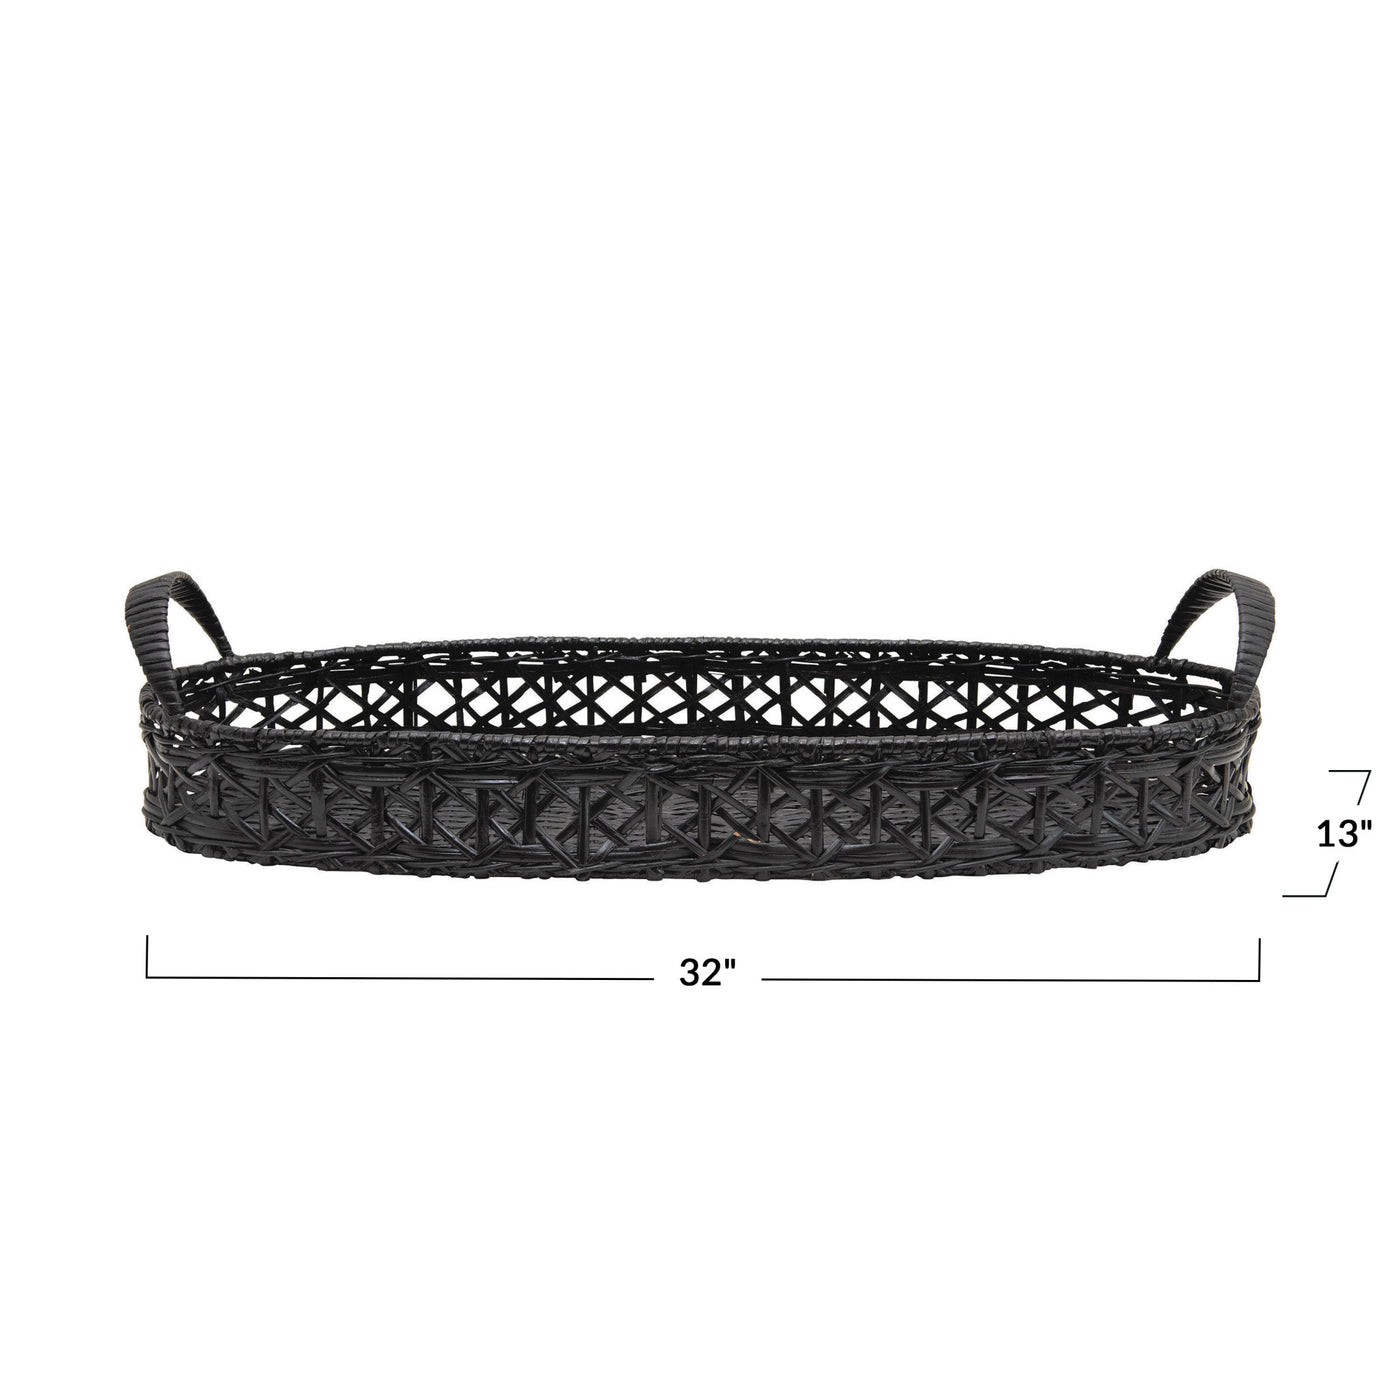 Black Rattan Tray with Handles